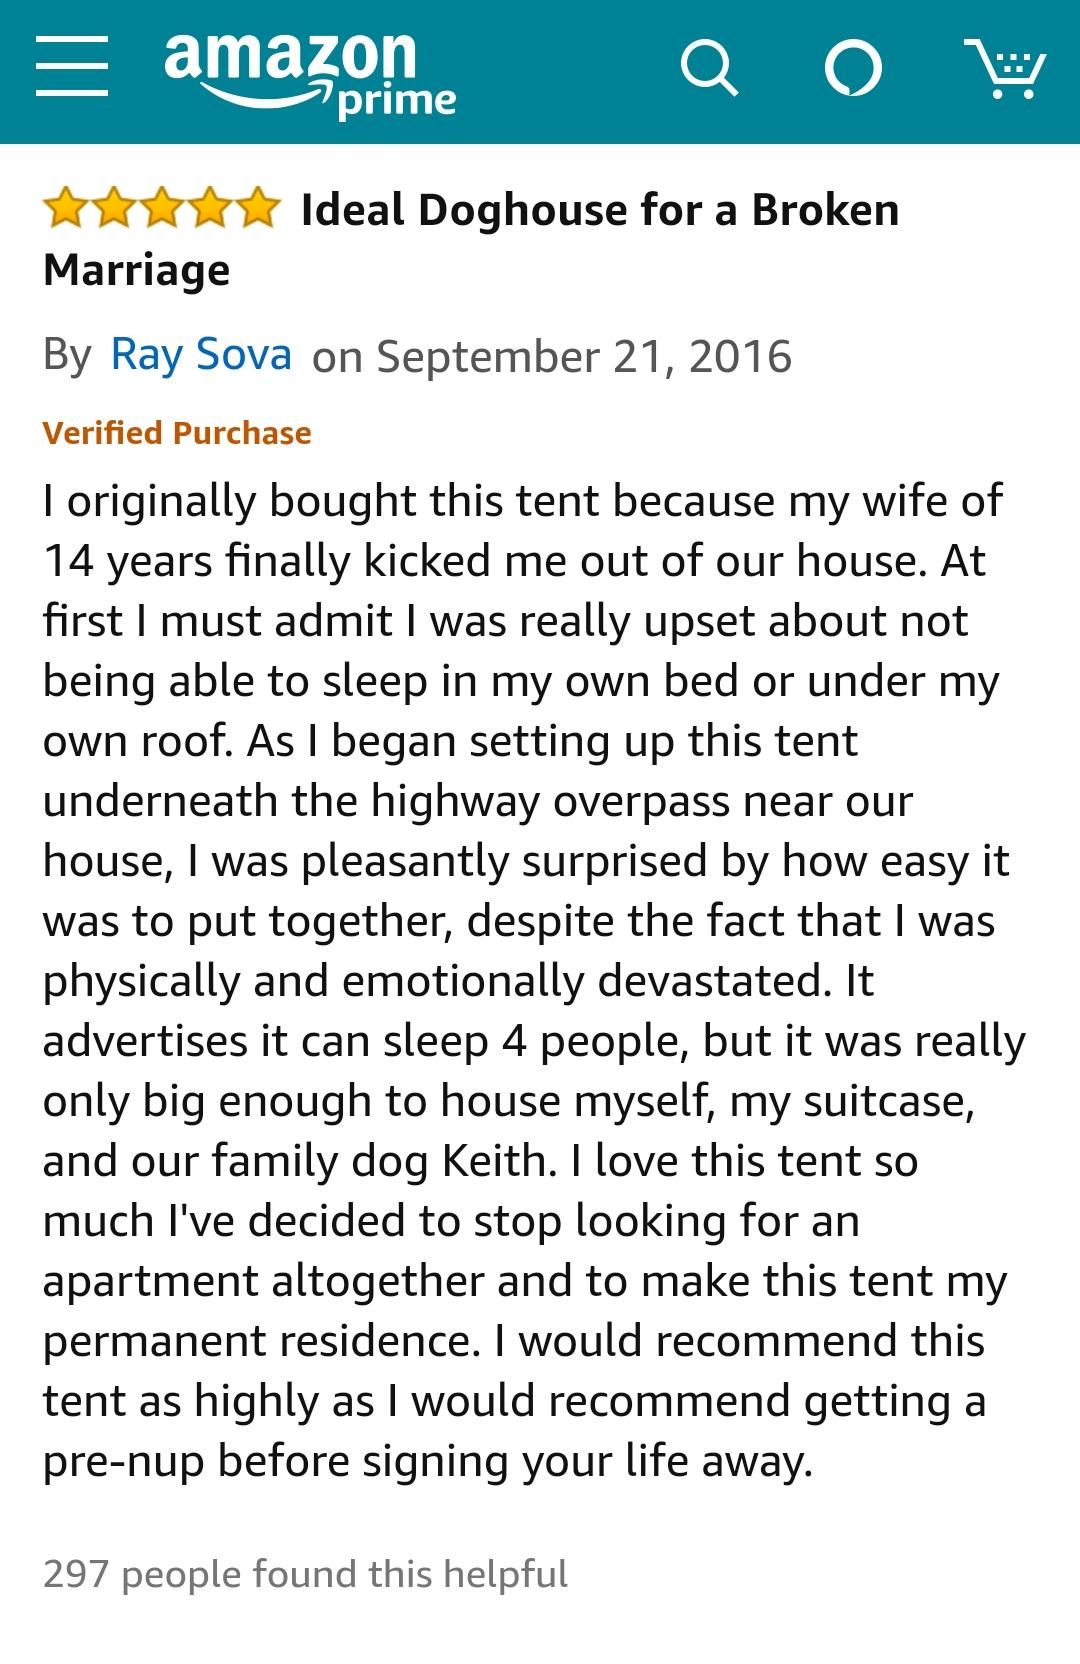 Tent review from Amazon made my day